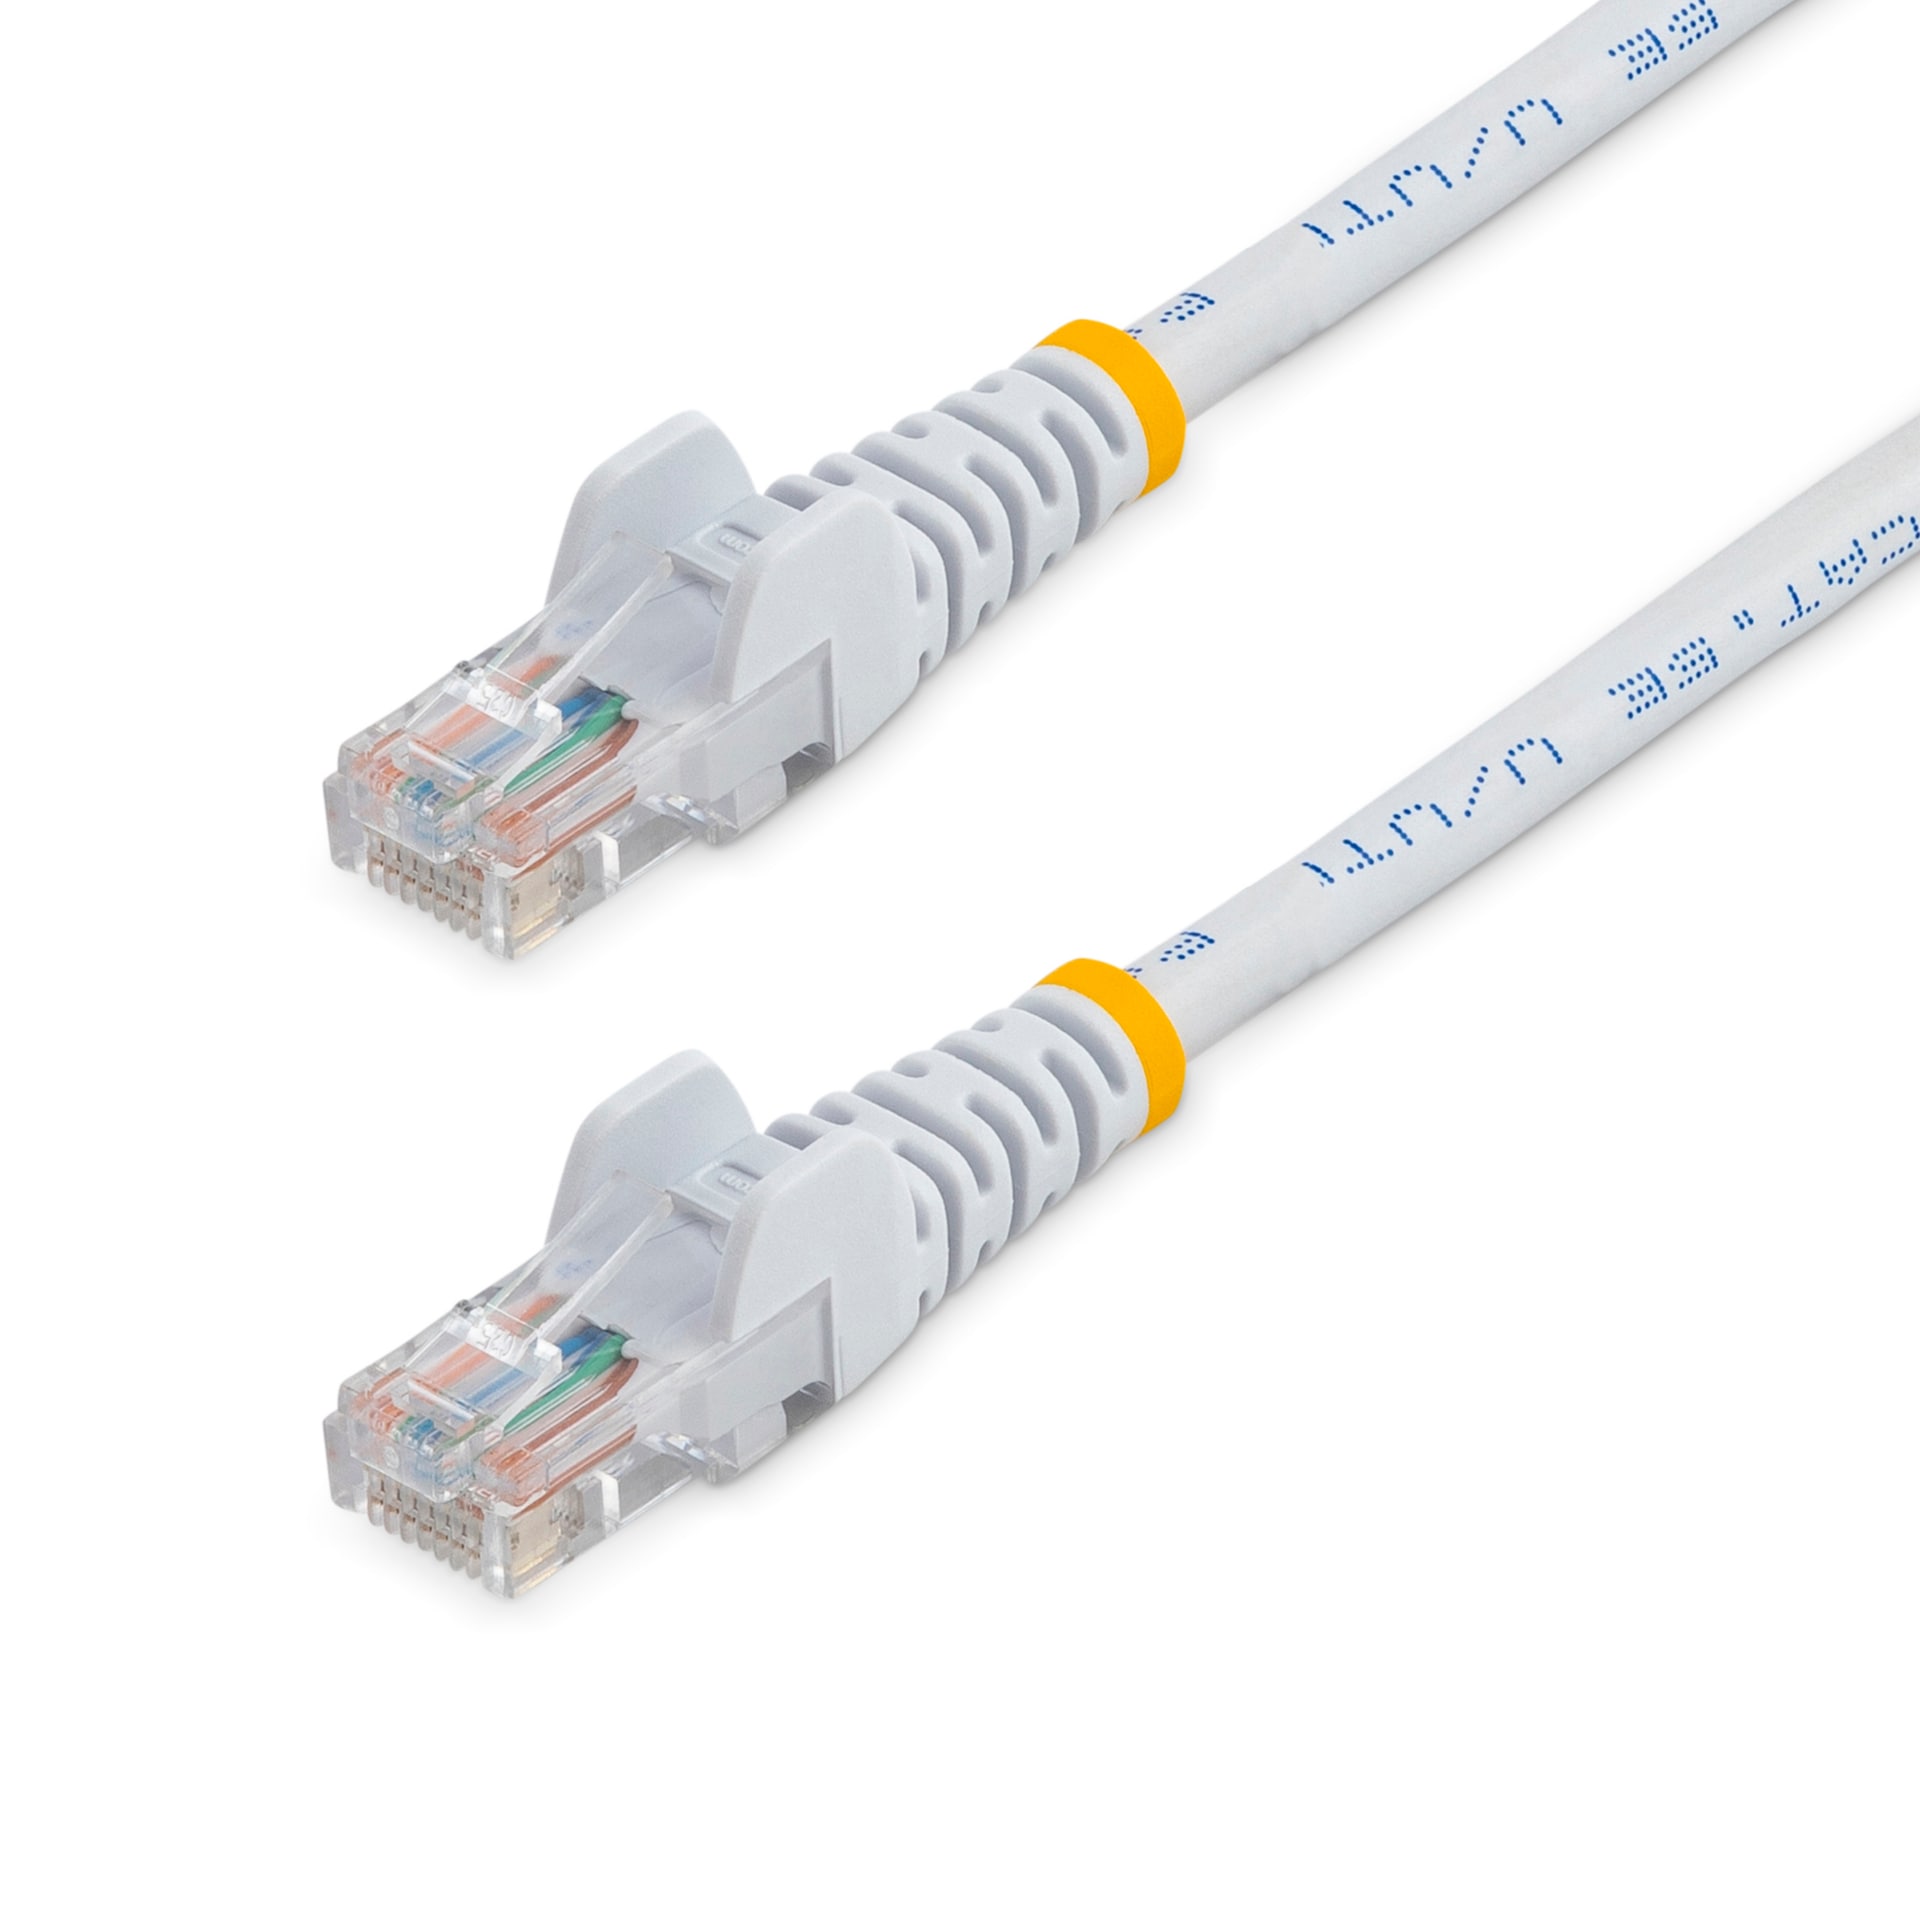 StarTech.com Cat5e Ethernet Cable 3 ft White - Cat 5e Snagless Patch Cable